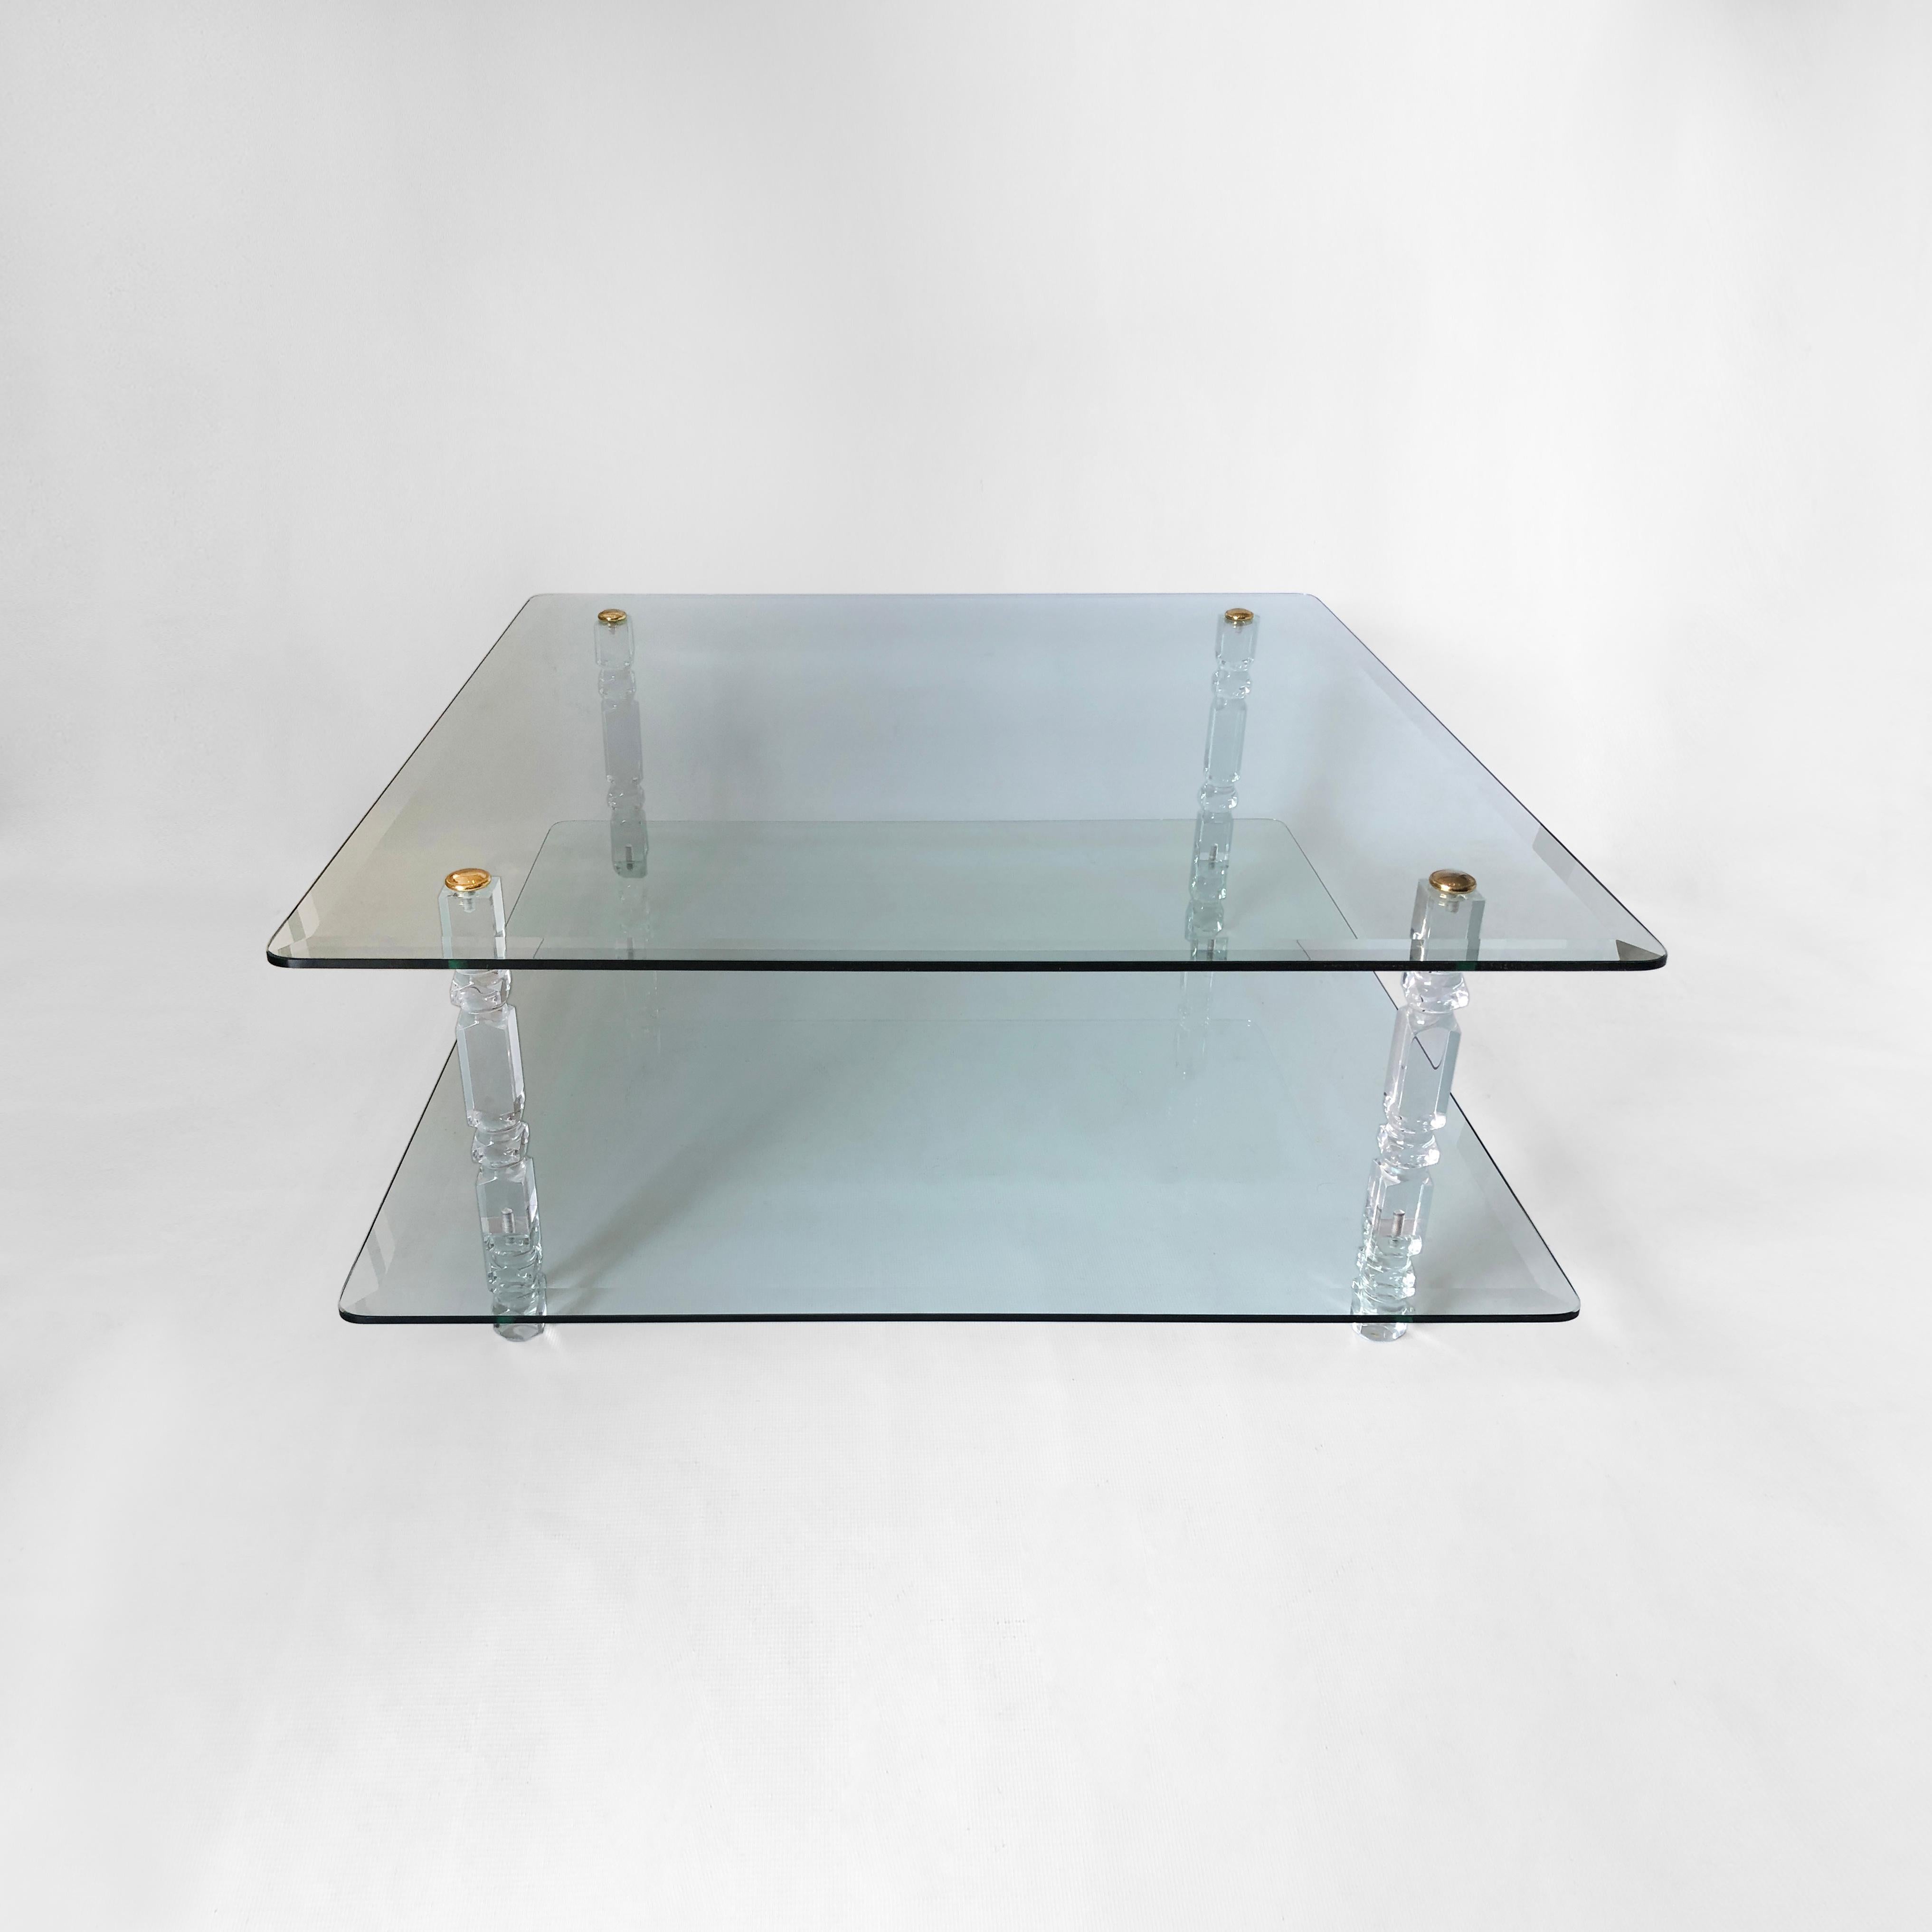 Two-Tier Lucite Glass Brass Coffee Table 1970s Modernist Charles Hollis Jones In Good Condition For Sale In London, GB